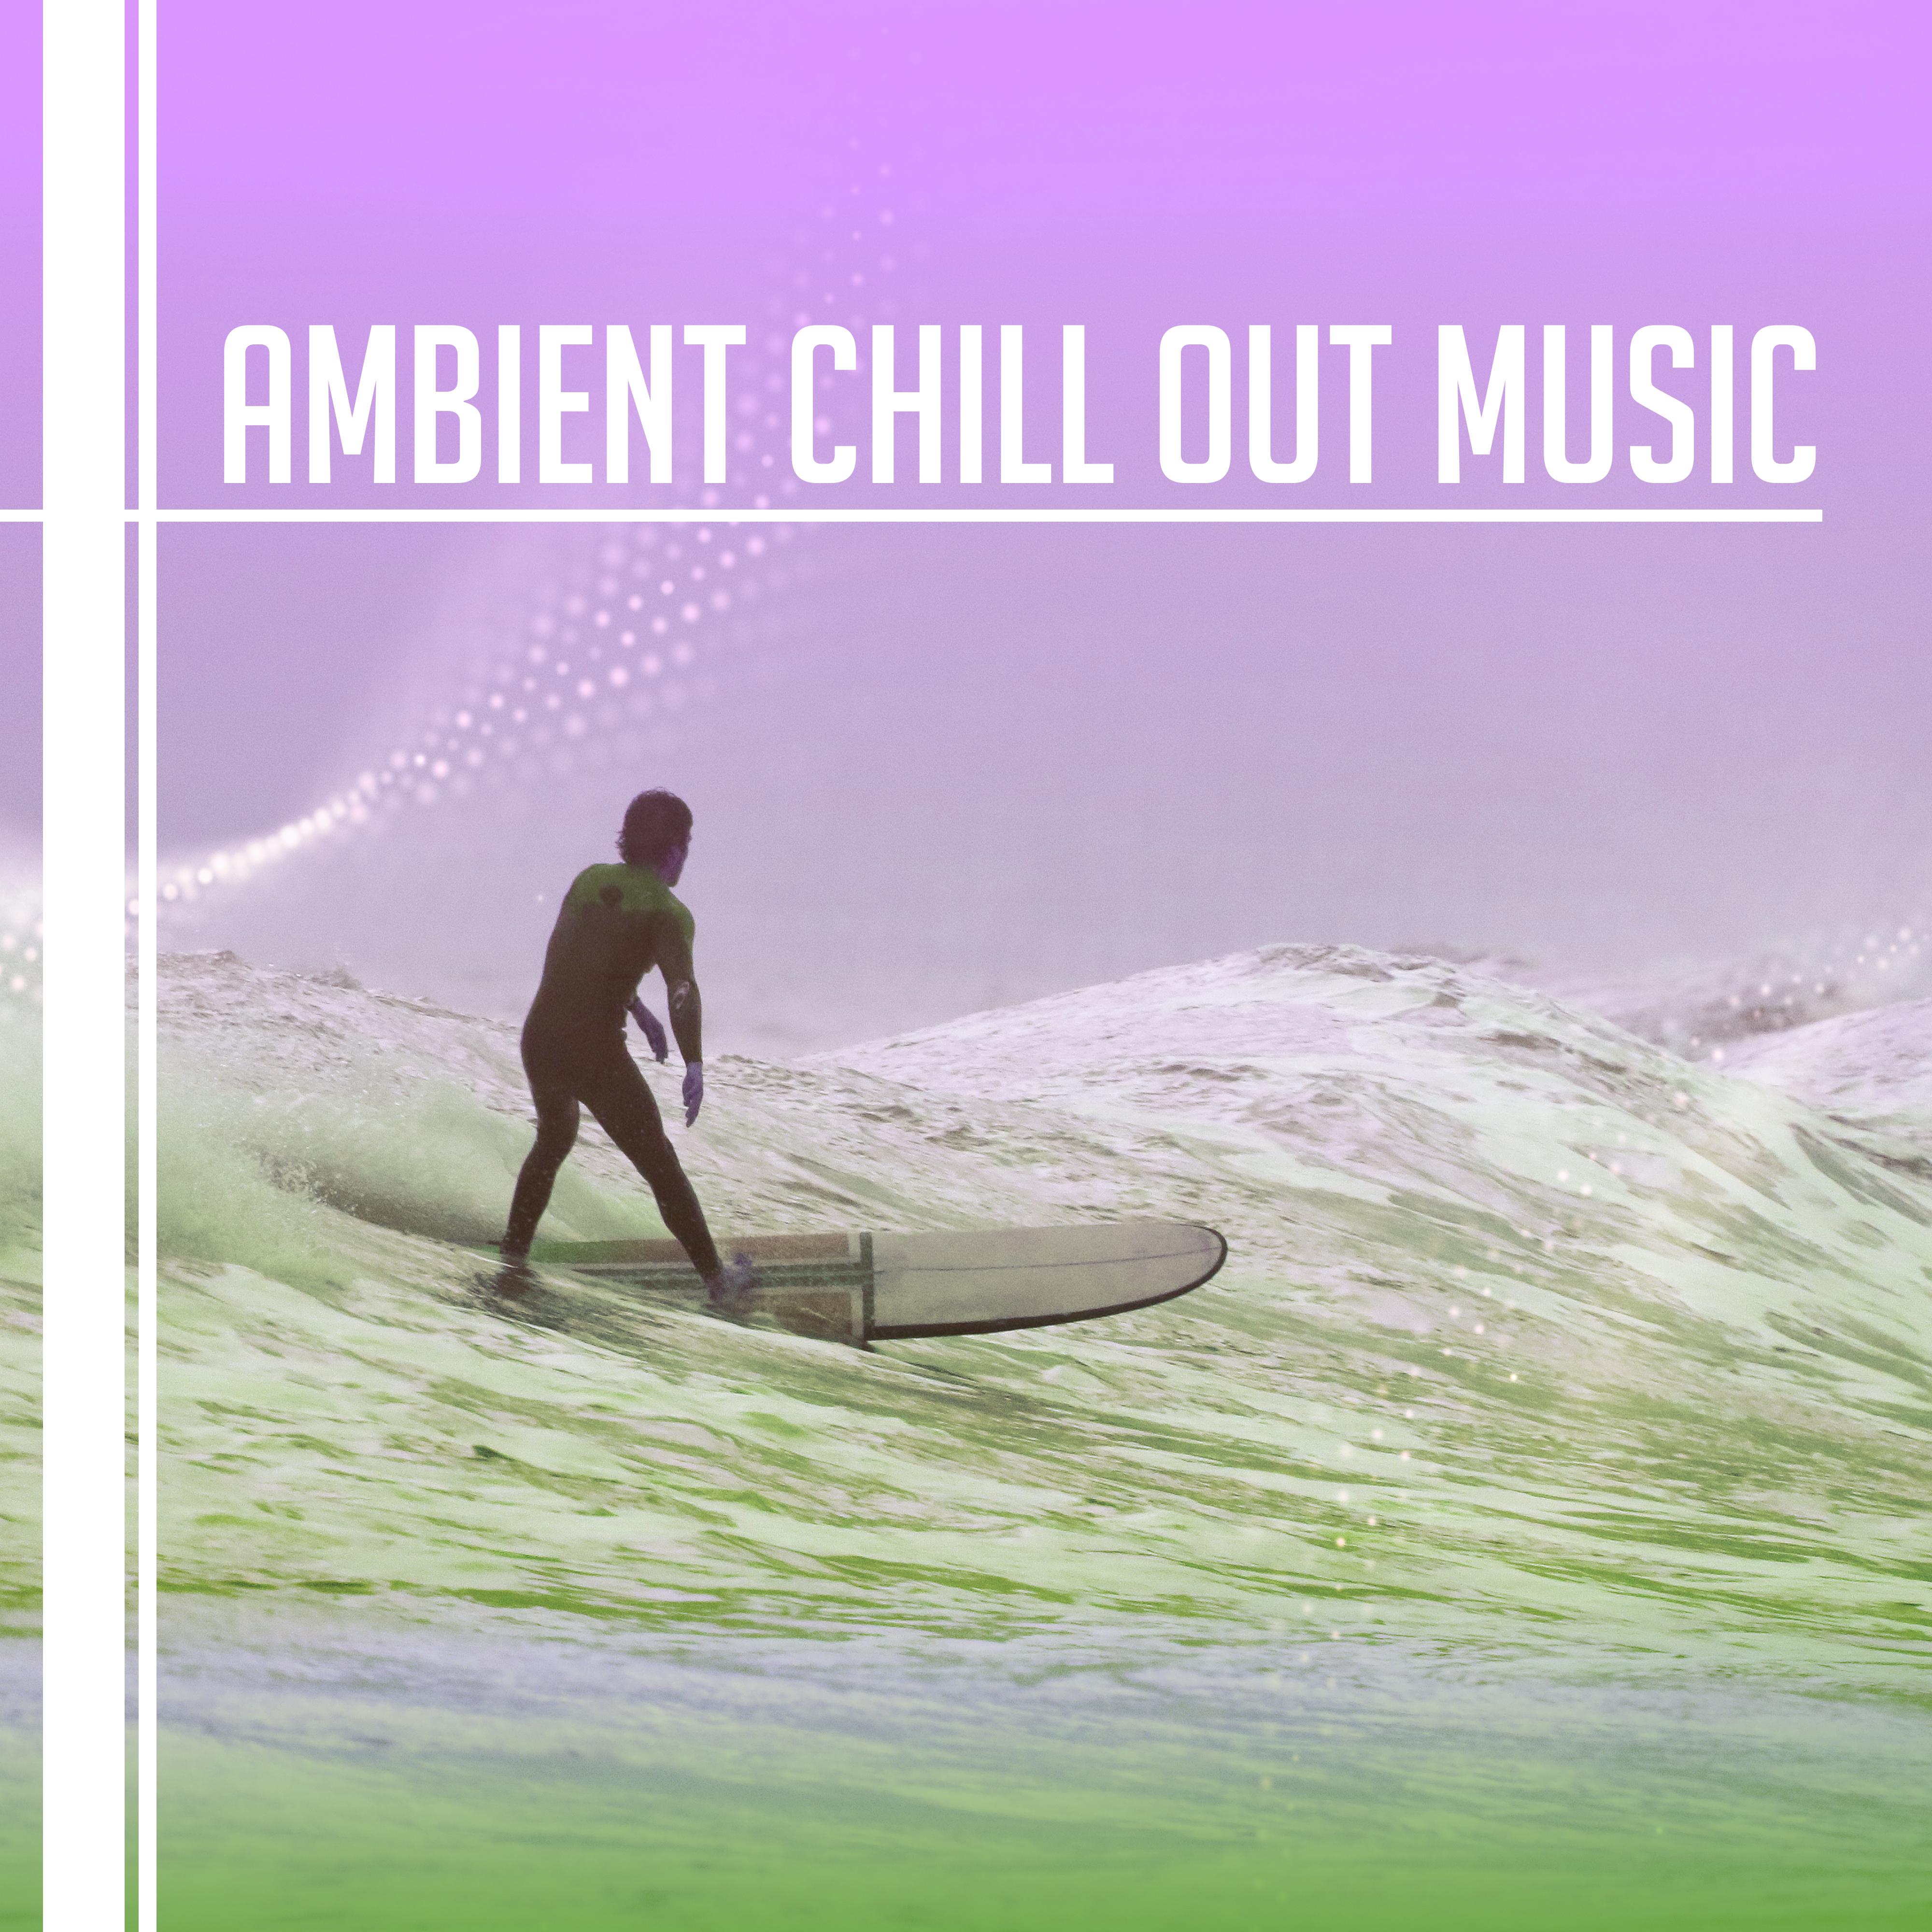 Ambient Chill Out Music – Soft Chill Out Sounds to Relax, Tropical Rest, Summer Time Music, Holiday Vibes